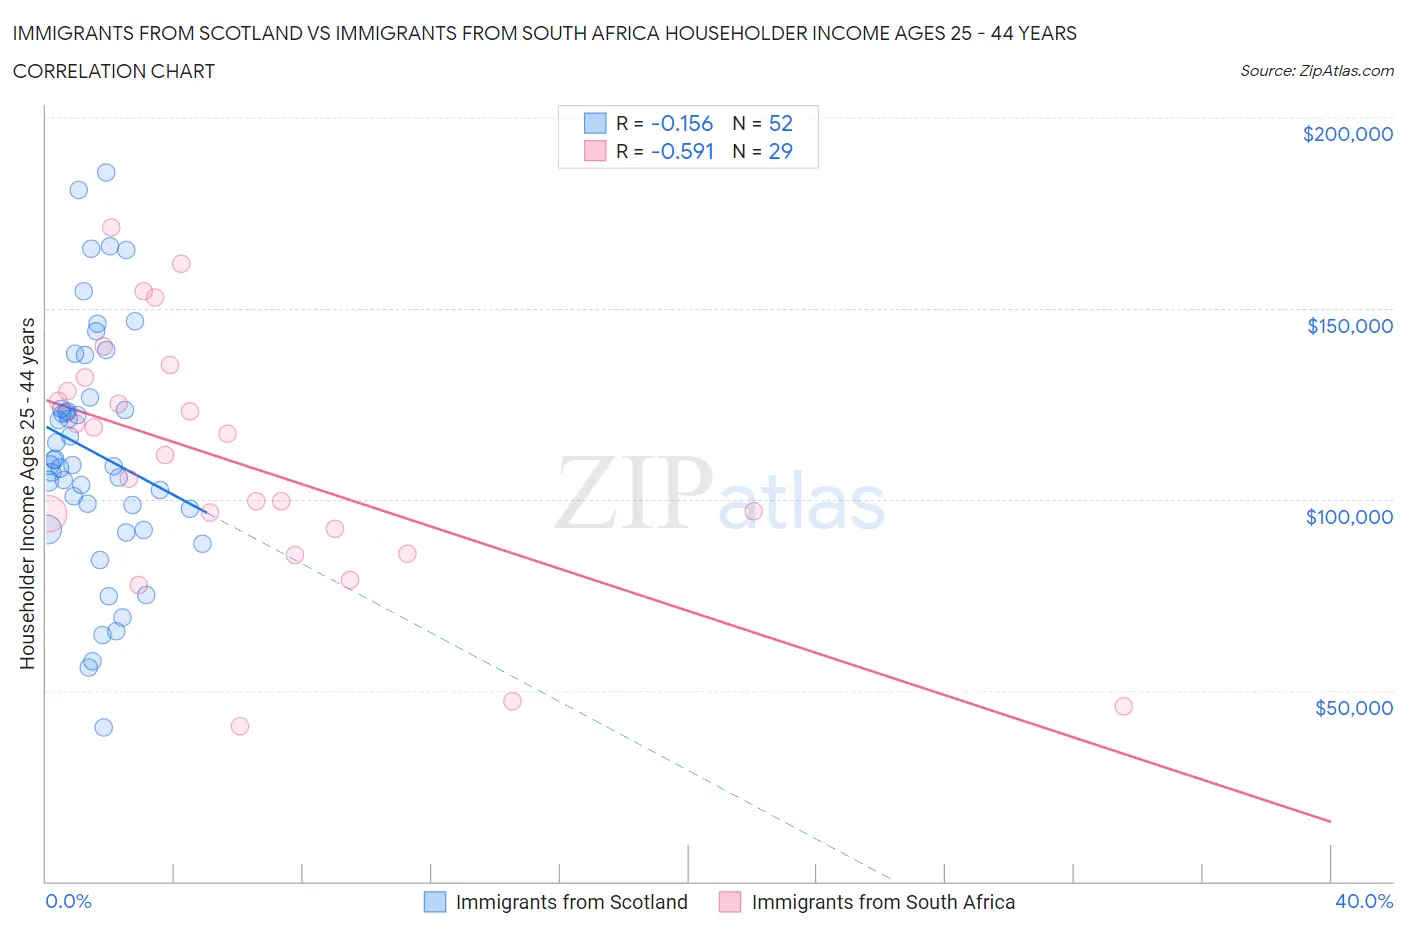 Immigrants from Scotland vs Immigrants from South Africa Householder Income Ages 25 - 44 years